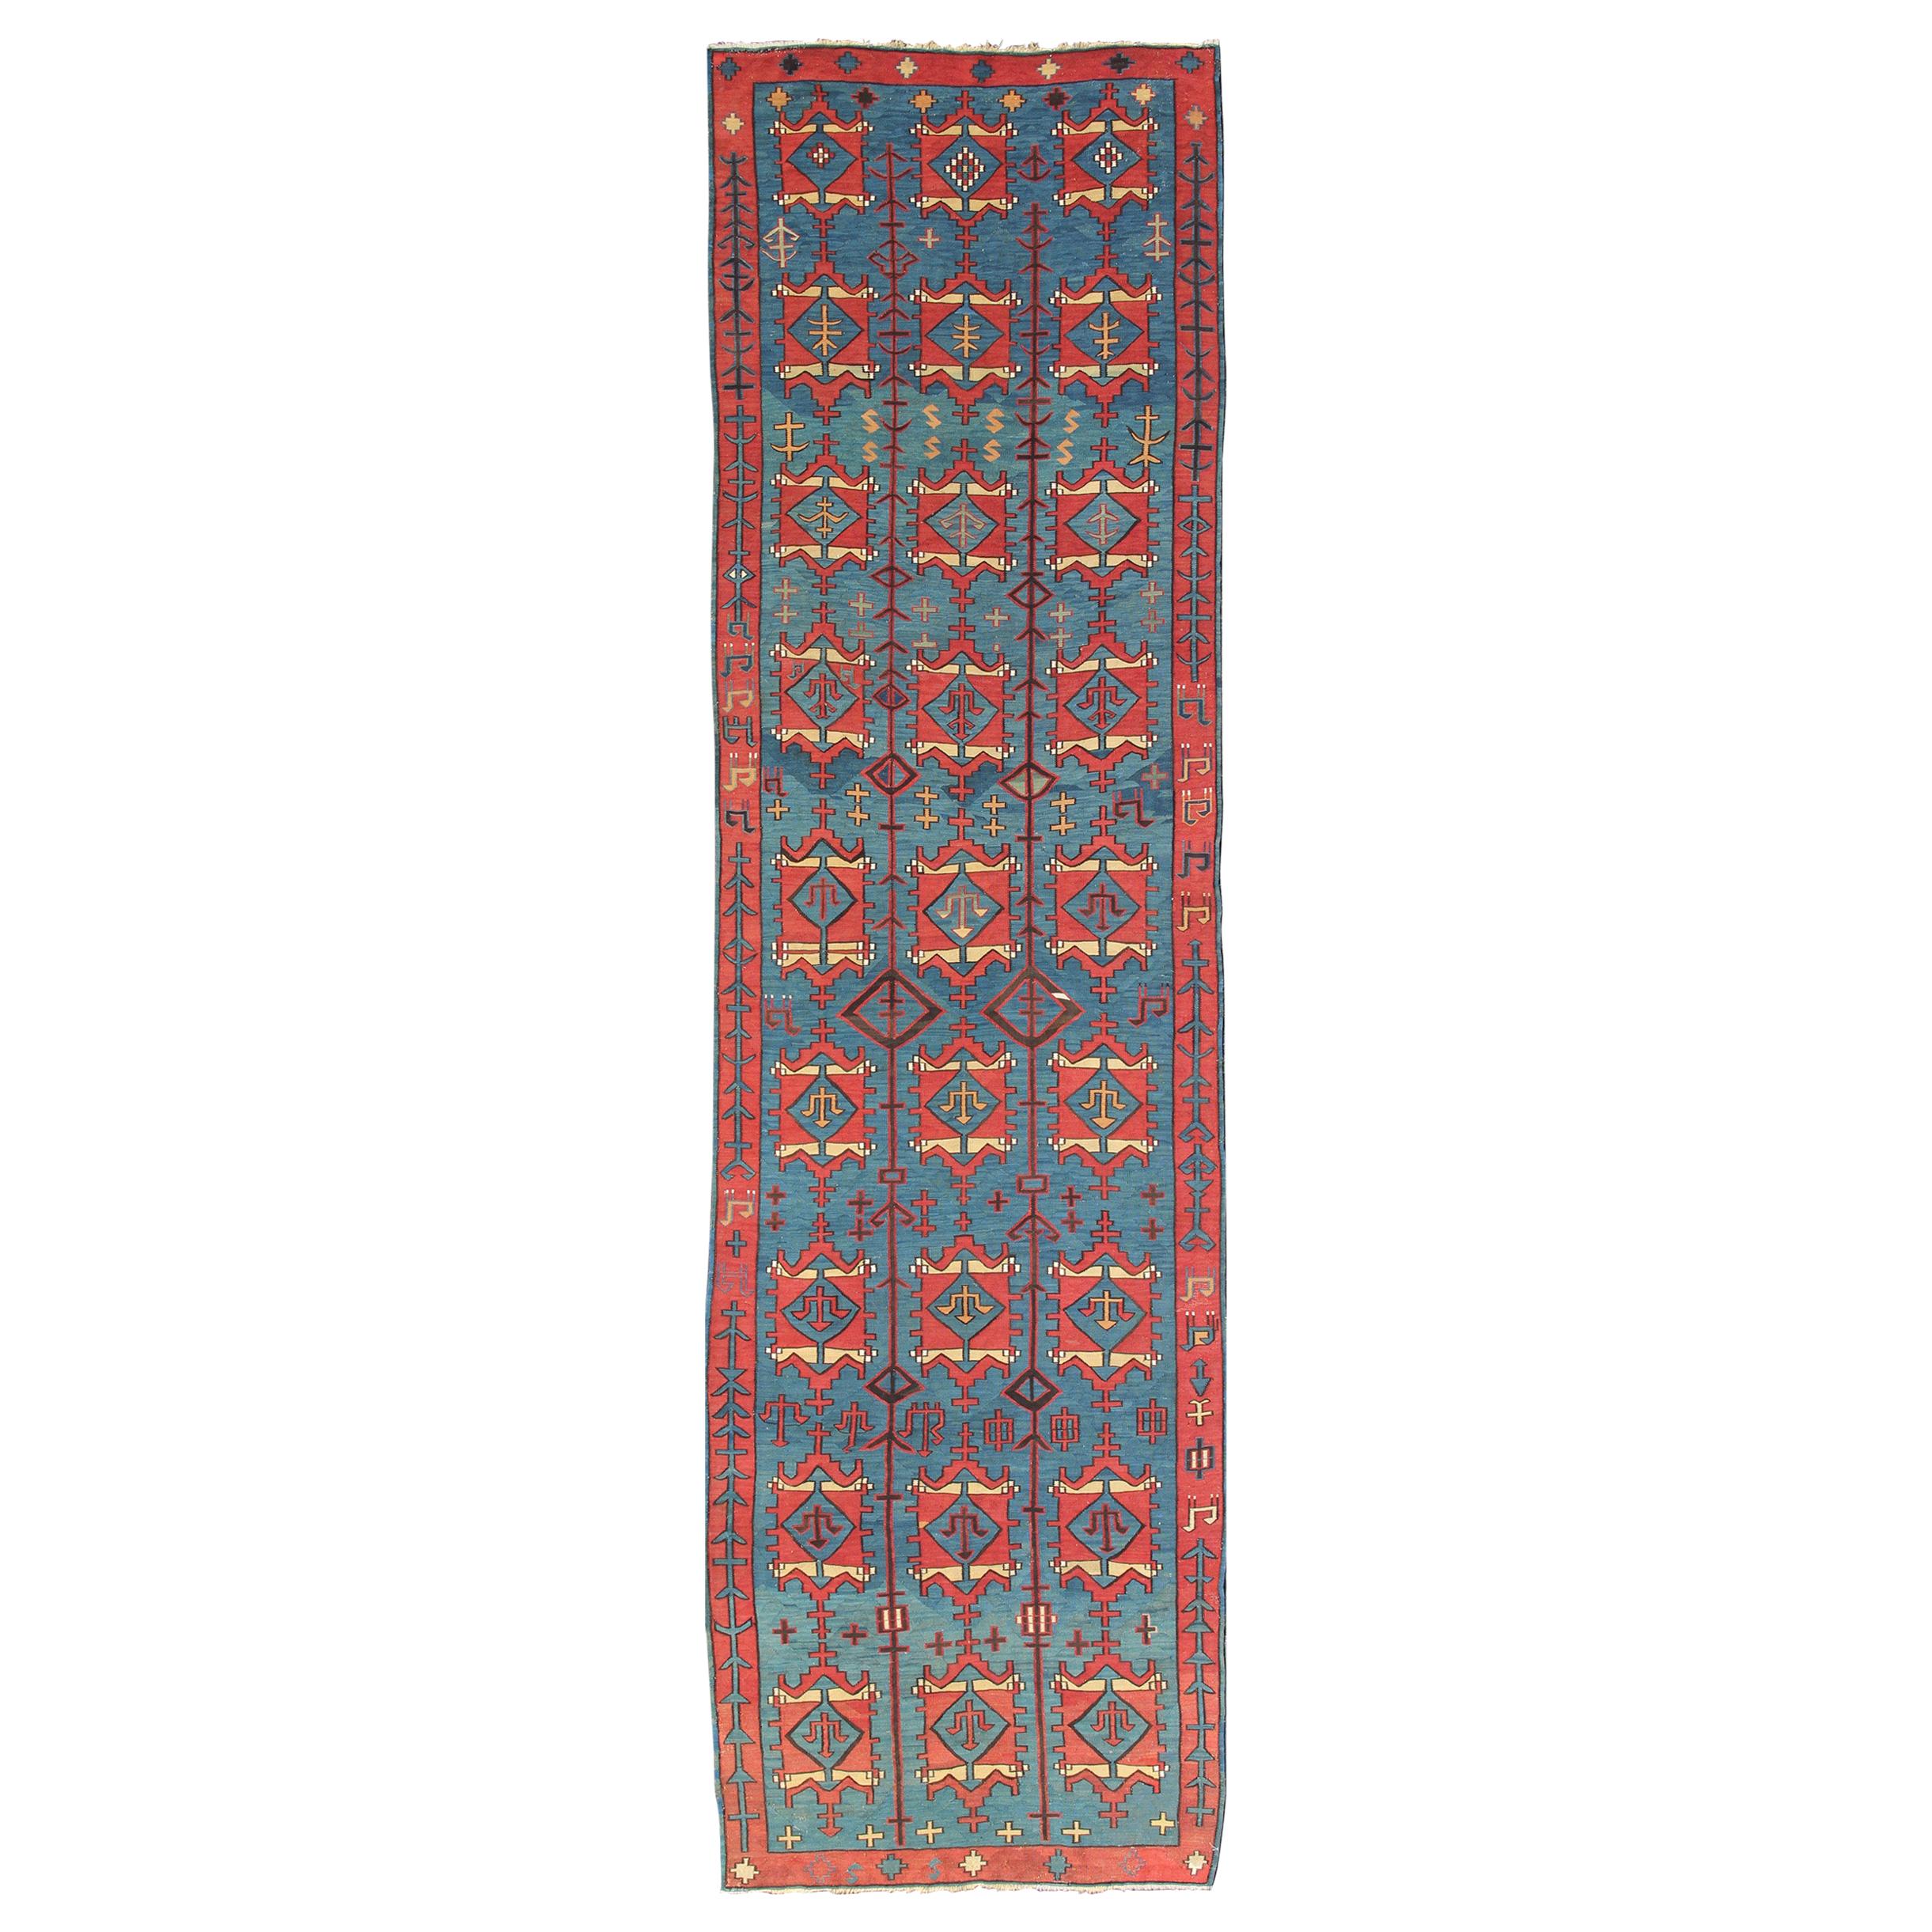 Rare Antique Caucasian Avar Tribal Flat-Weave Gallery Size in Blue and Red